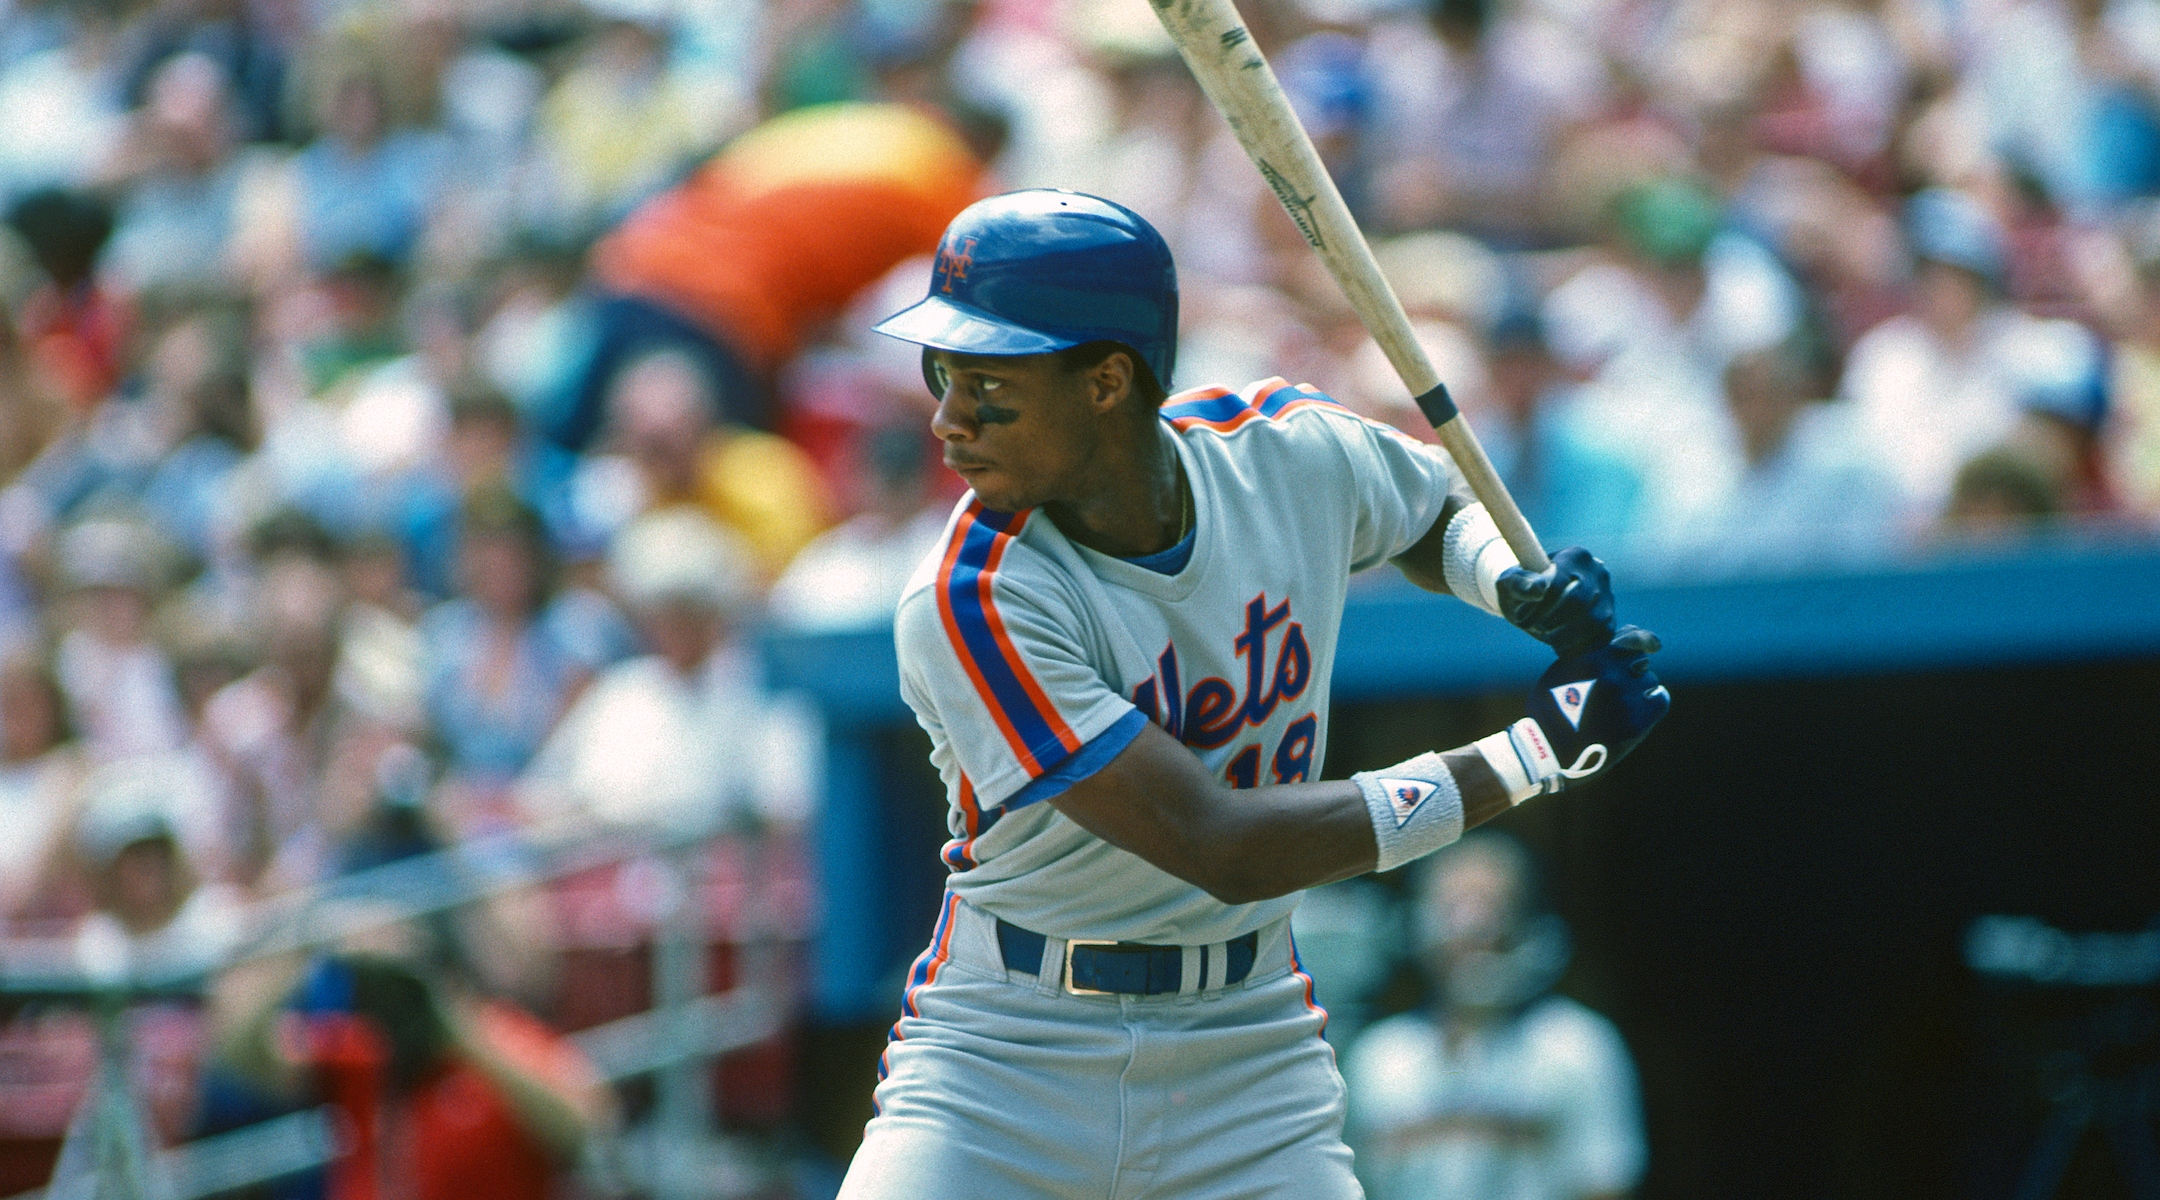 Darryl Strawberry bats in a game between the New York Mets and the Pittsburgh Pirates at Three Rivers Stadium in Pittsburgh in 1986. (George Gojkovich/Getty Images)